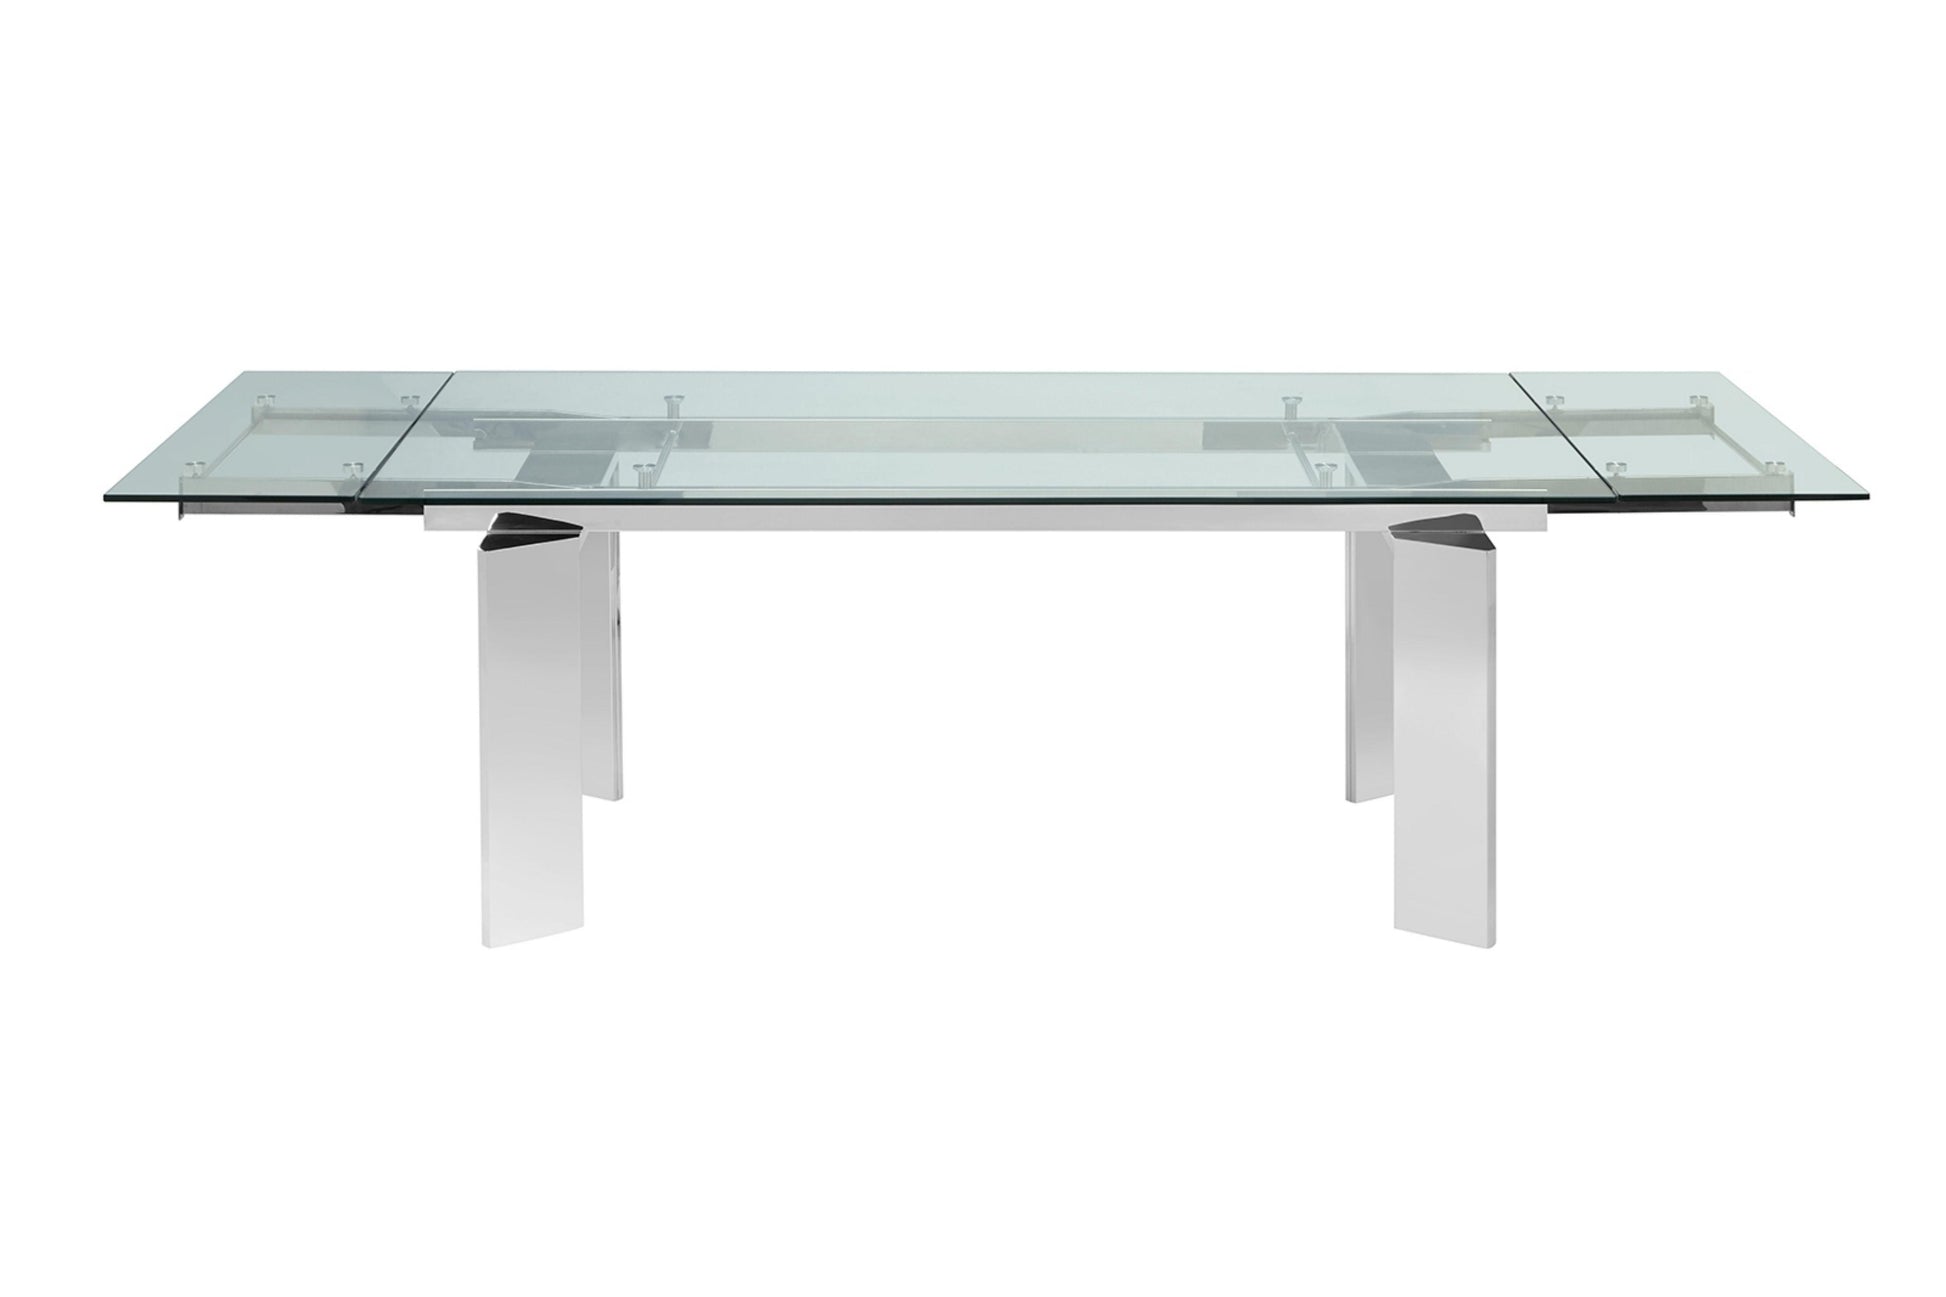  dining table in clear glass with polished